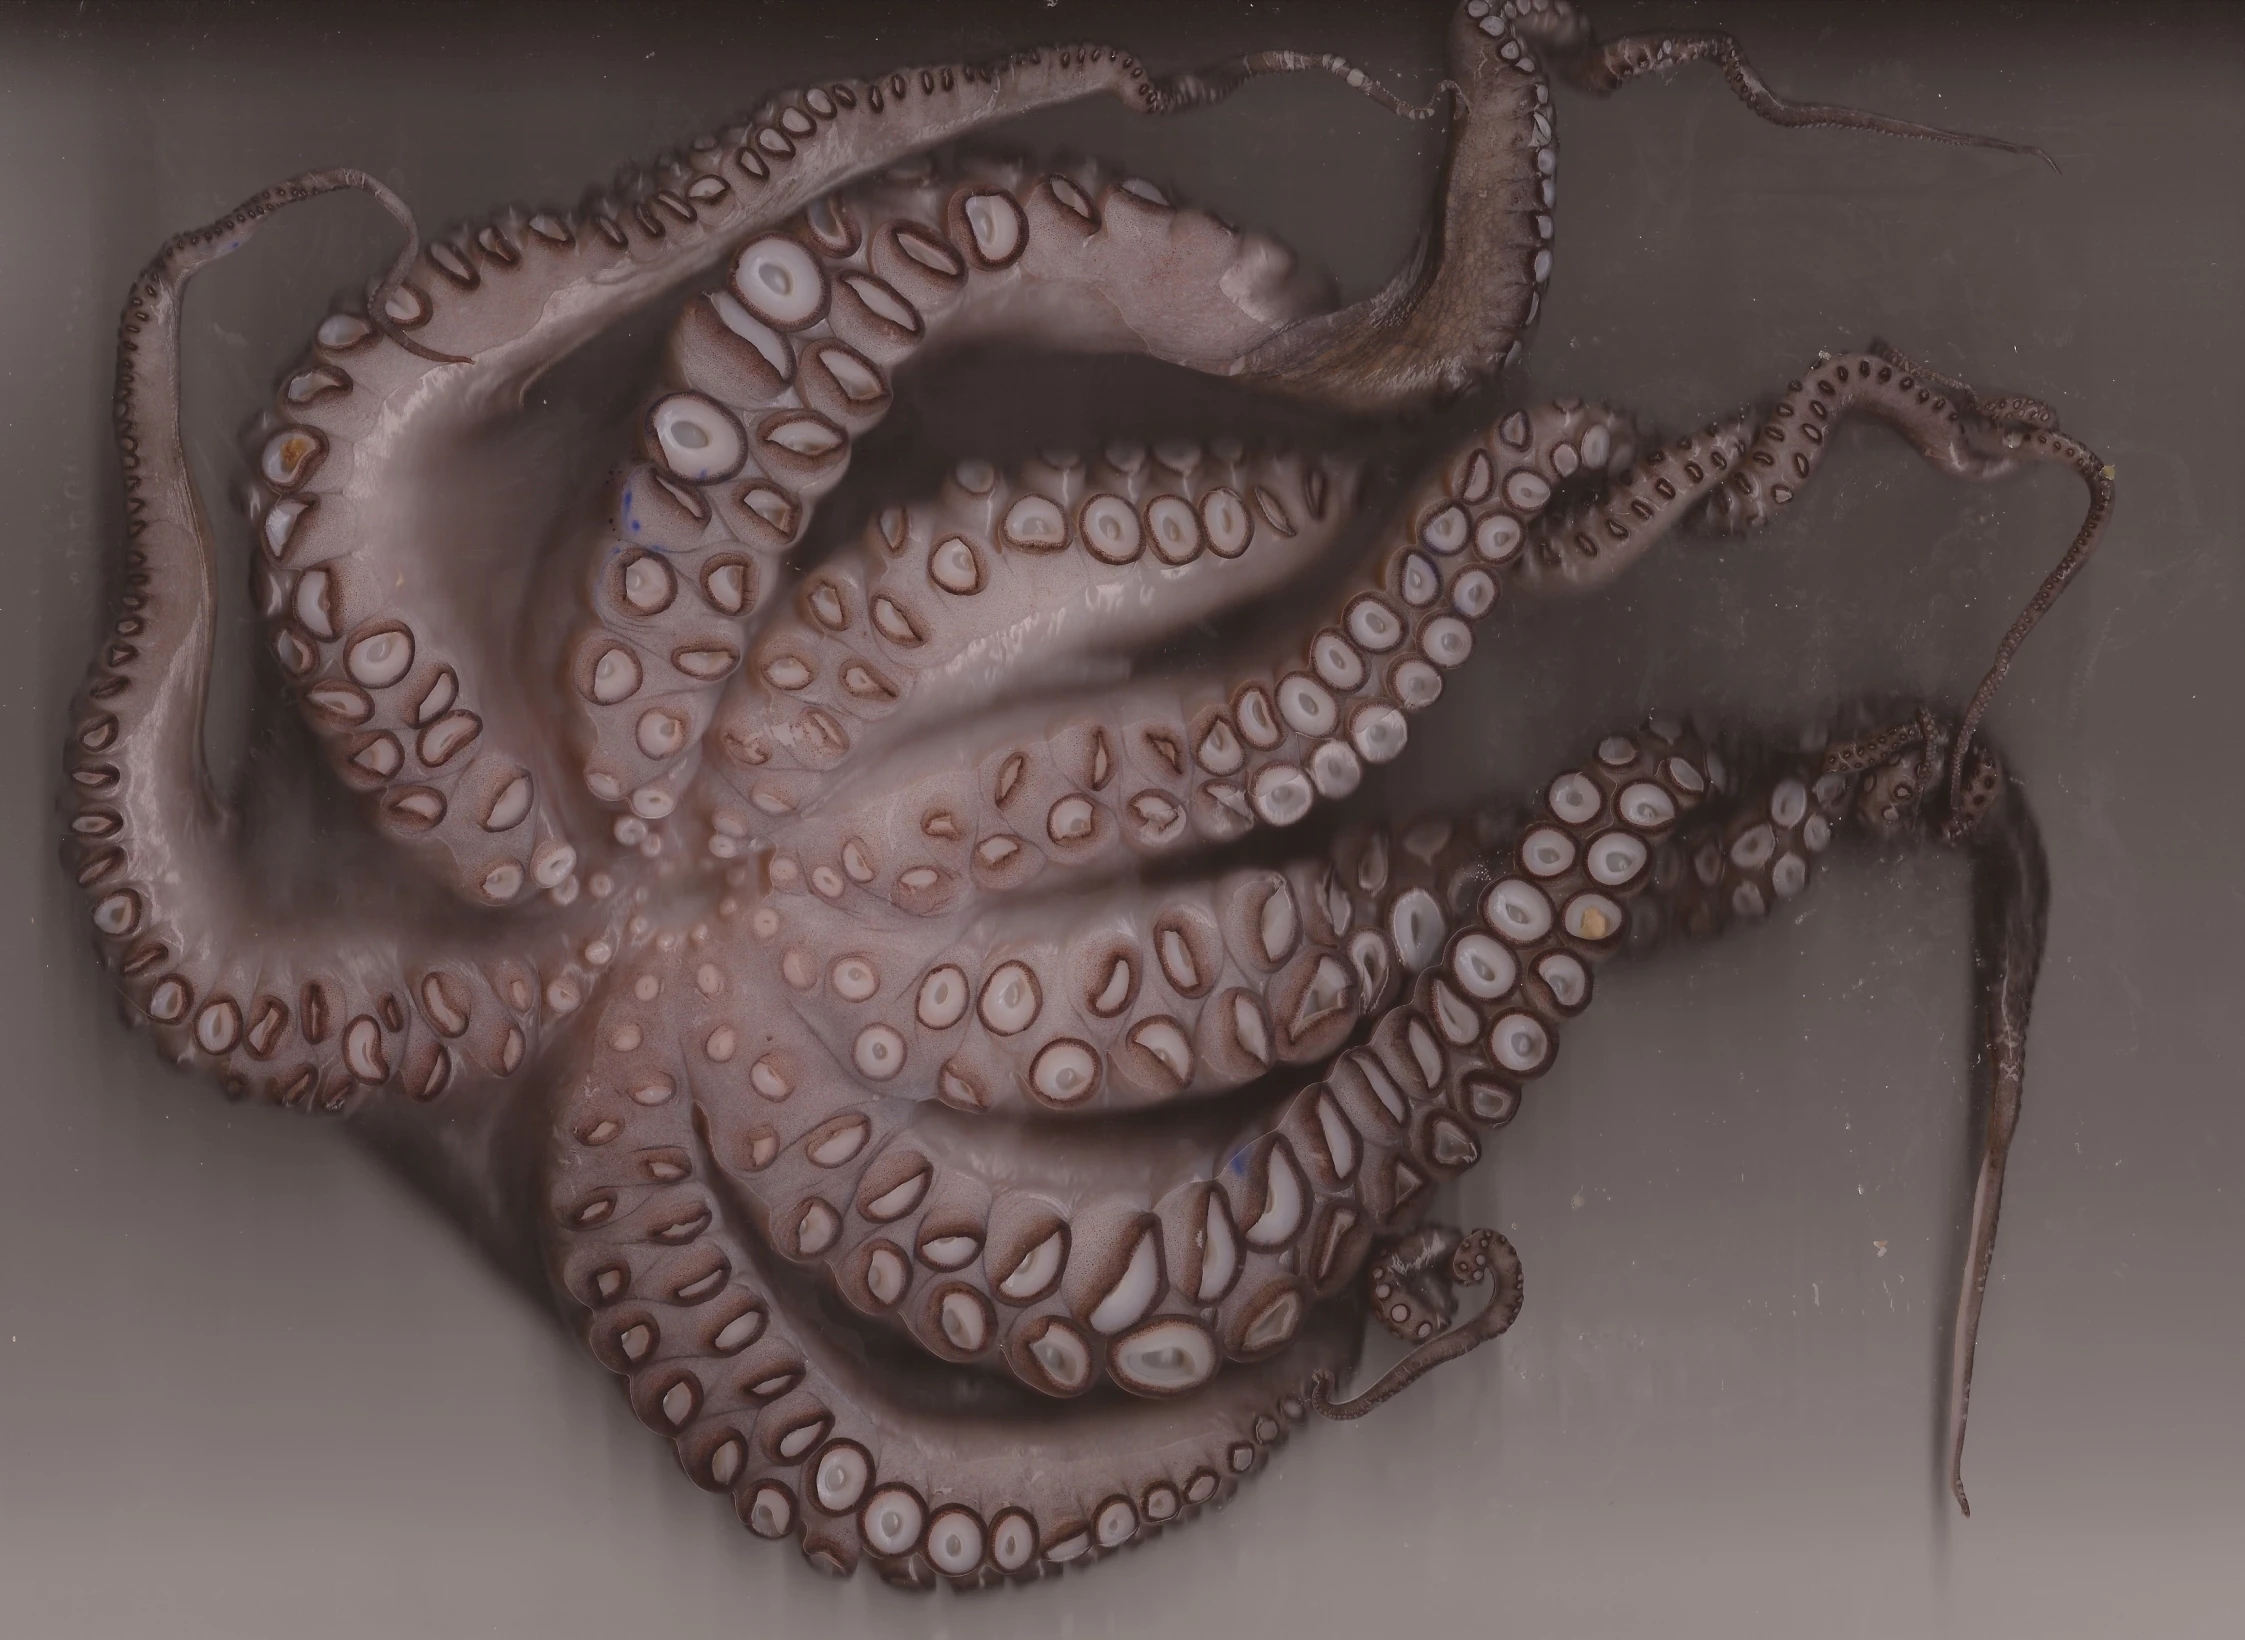 an octo is shown inside of a dark room